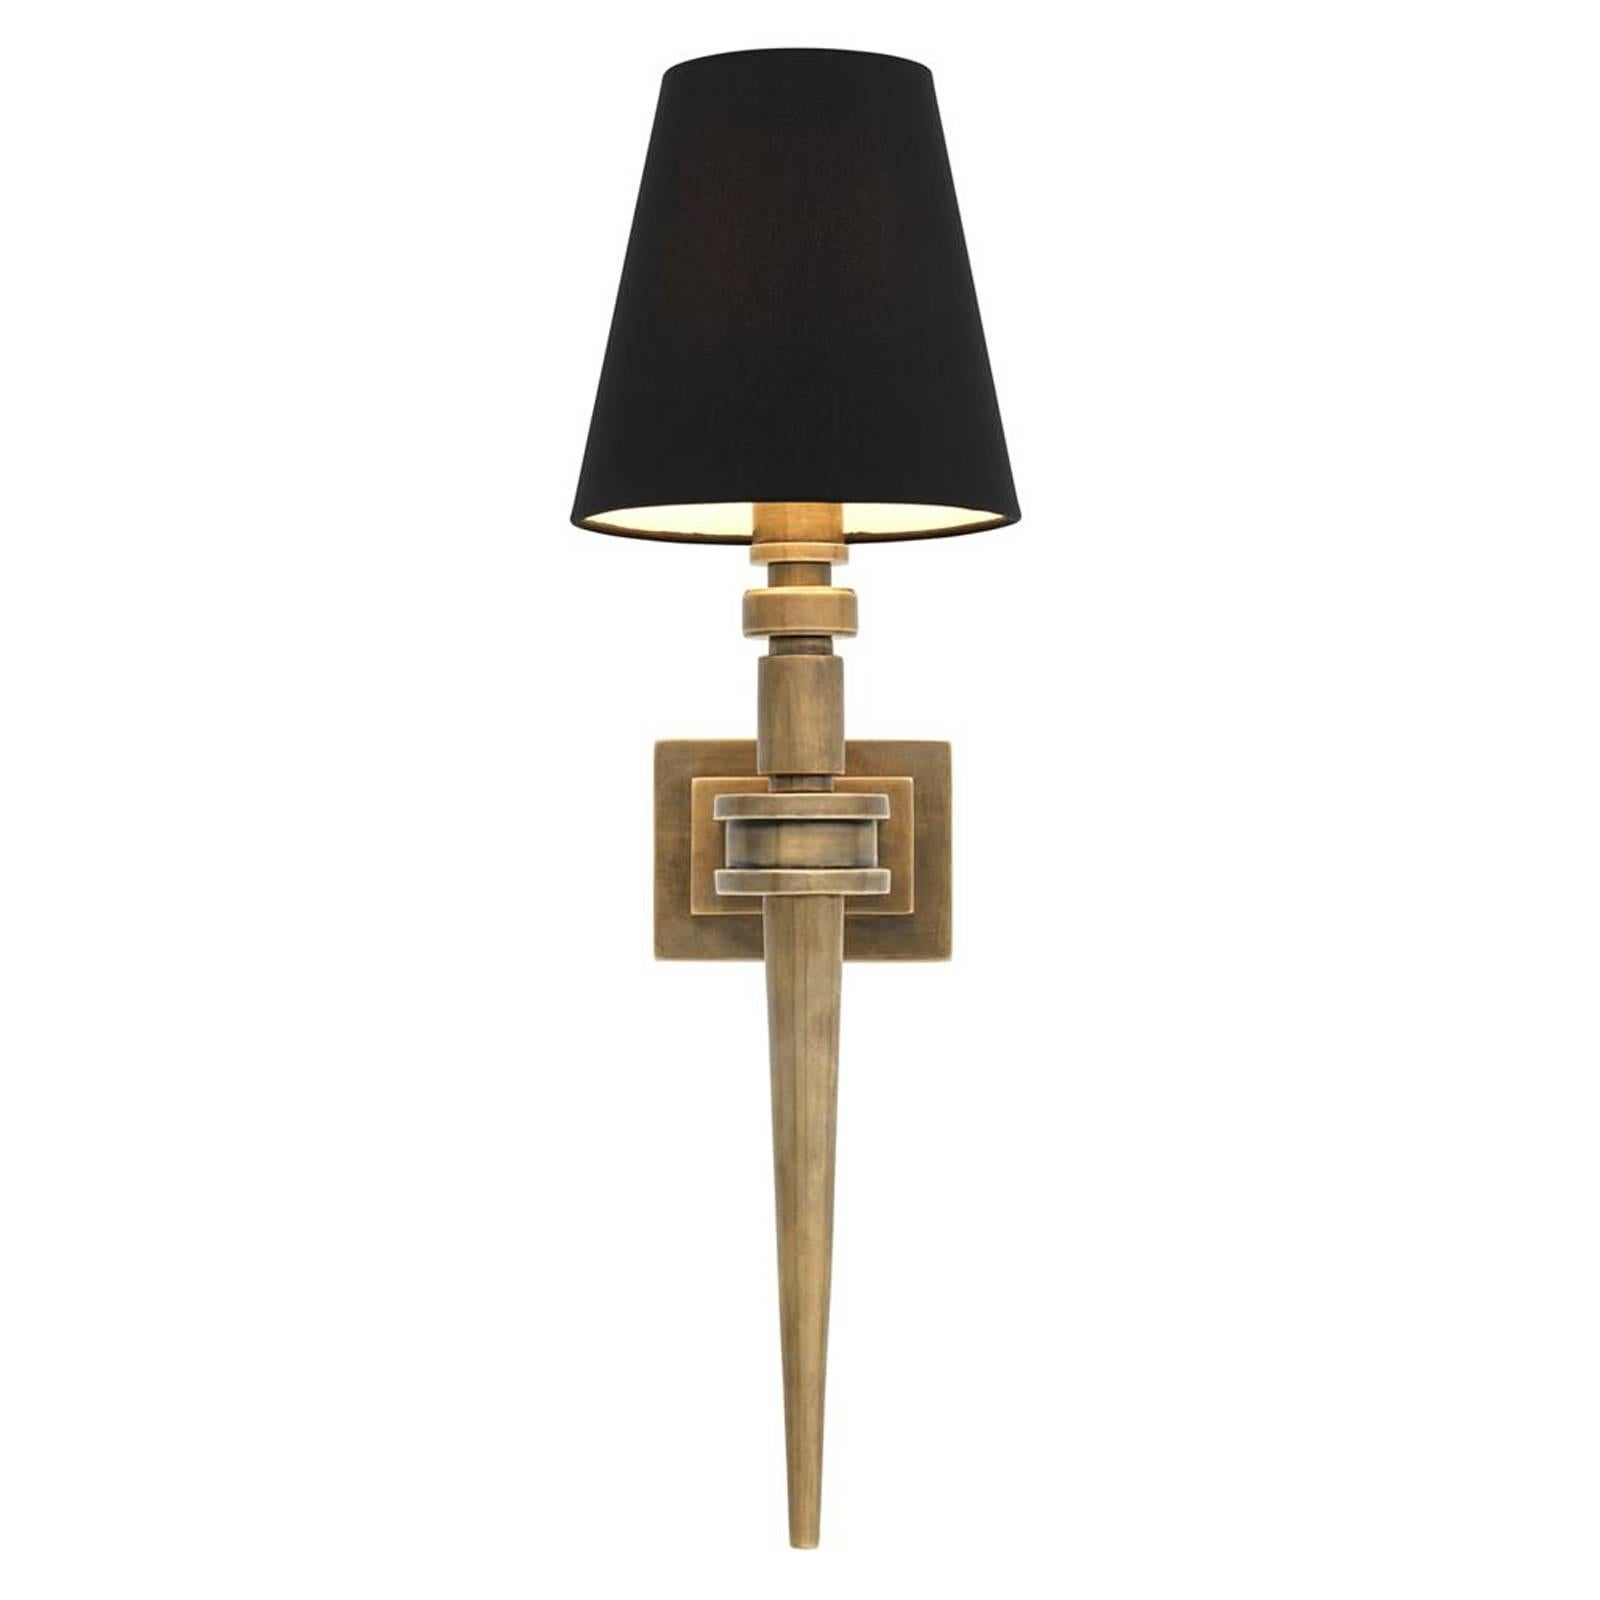 Indian Austerlitz Single Wall Lamp in Vintage Brass or in Nickel Finish For Sale